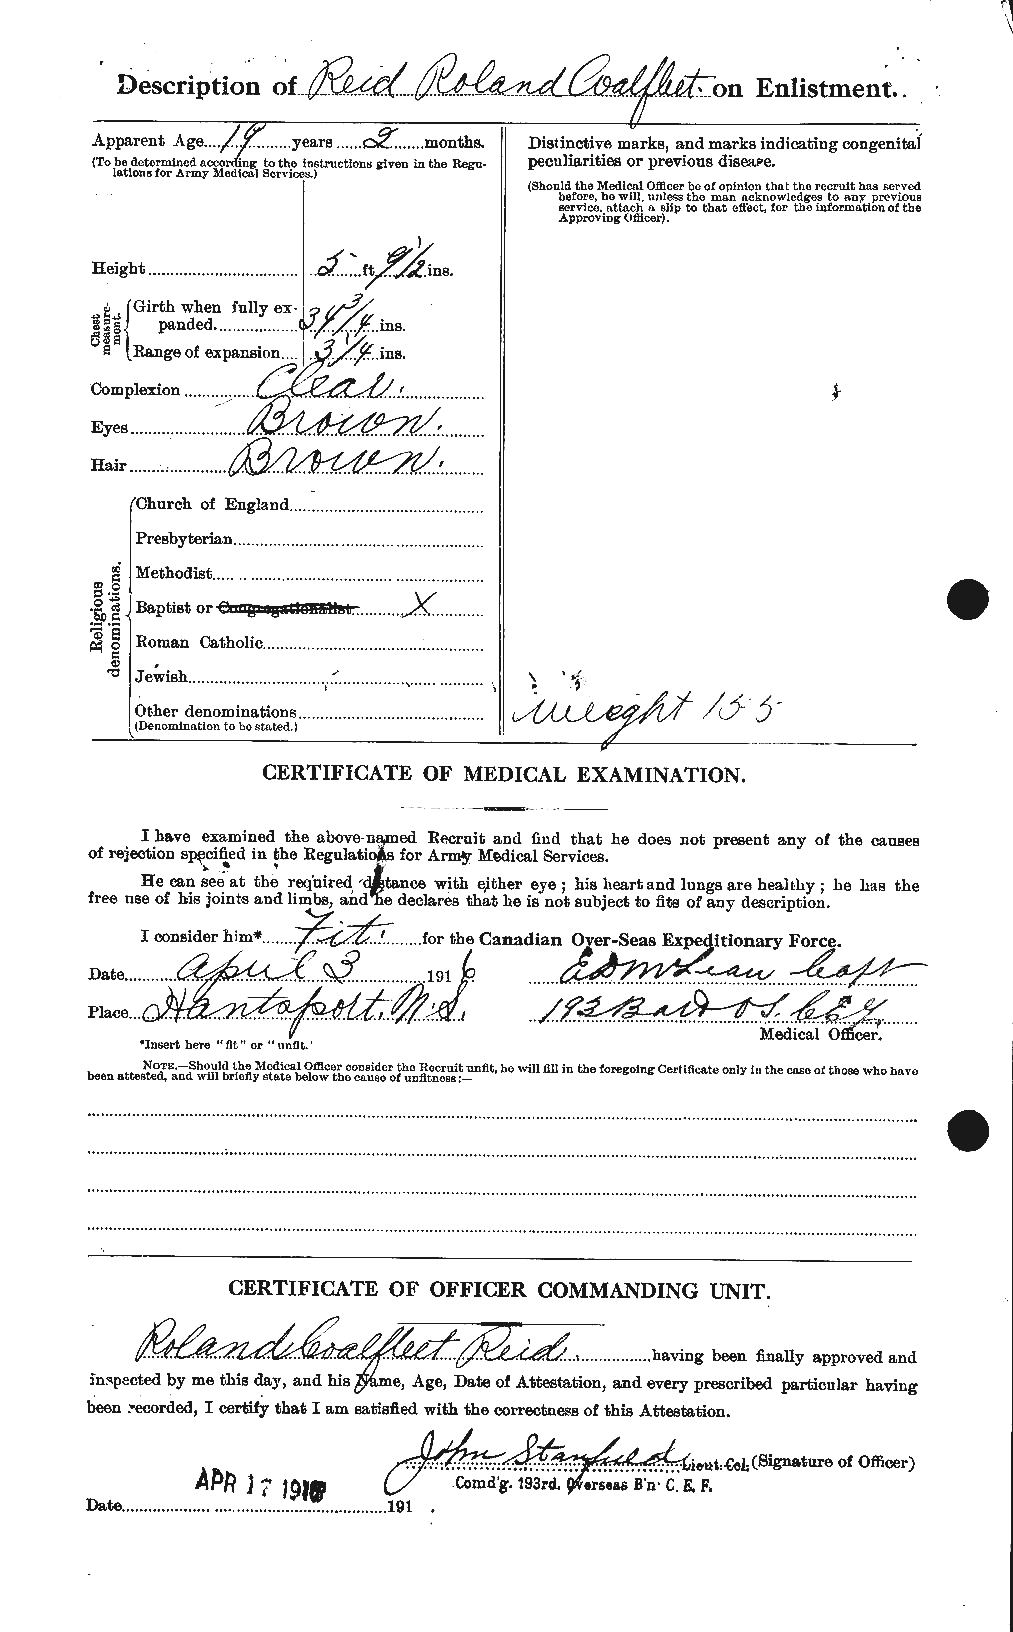 Personnel Records of the First World War - CEF 601930b